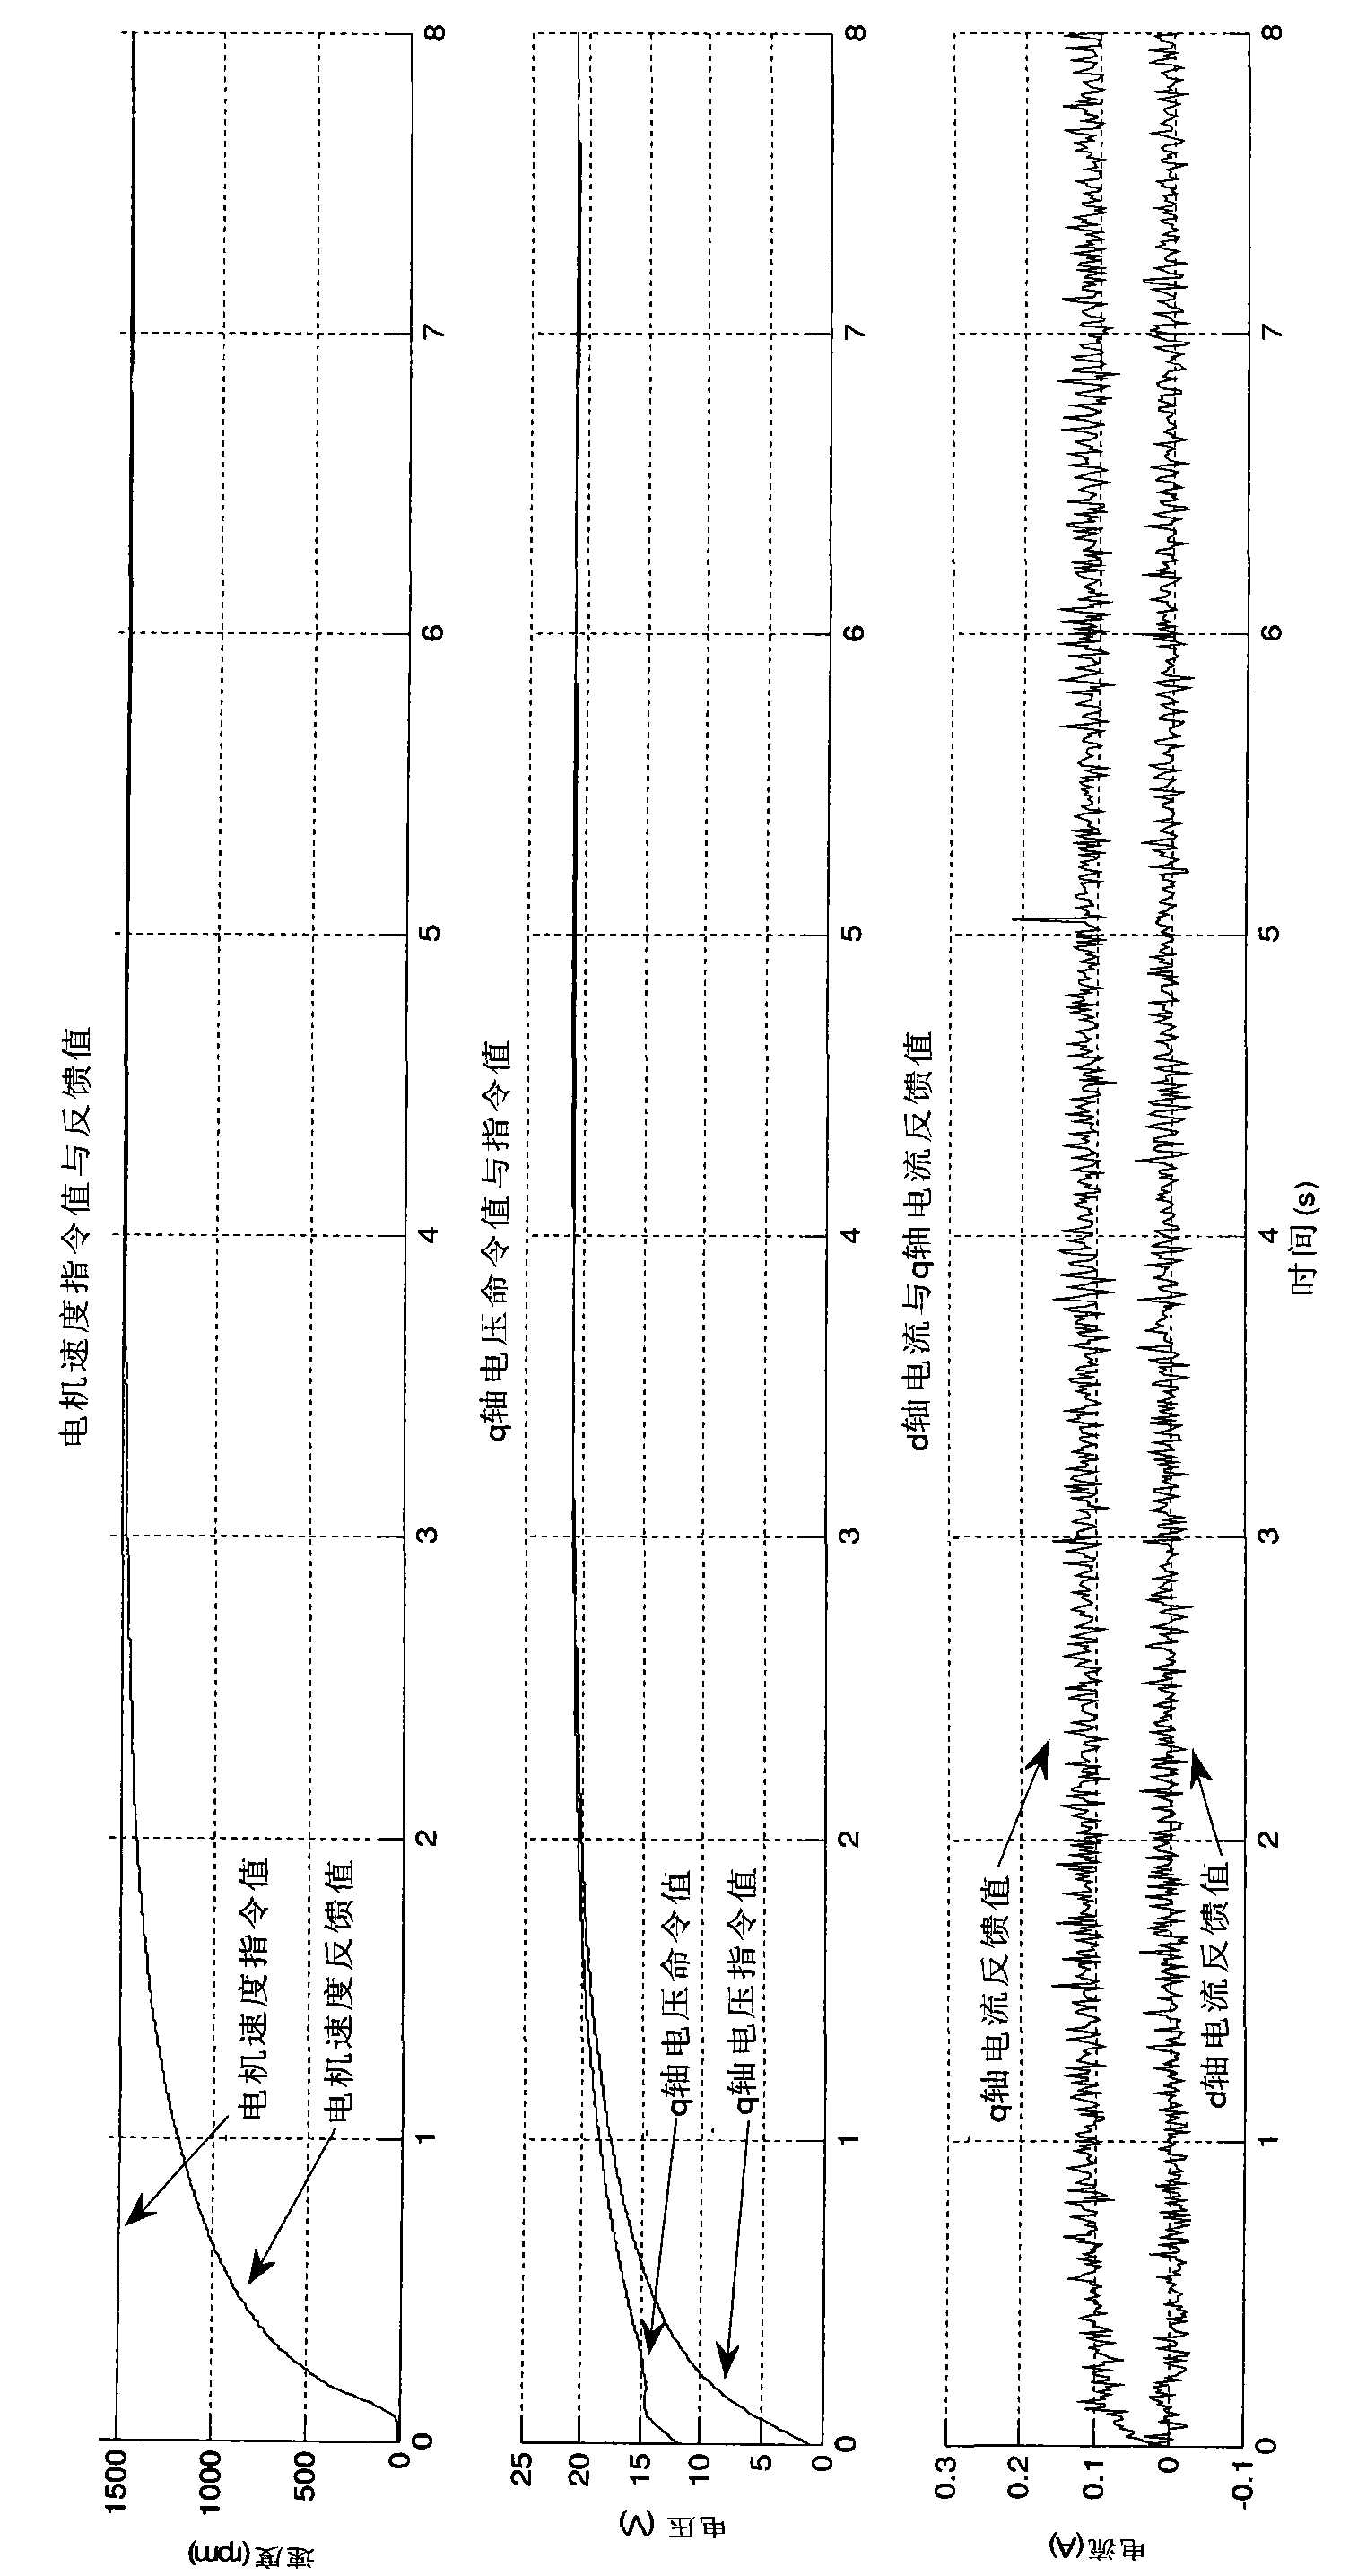 Timing control system and method for non-salient pole permanent magnet synchronous motor